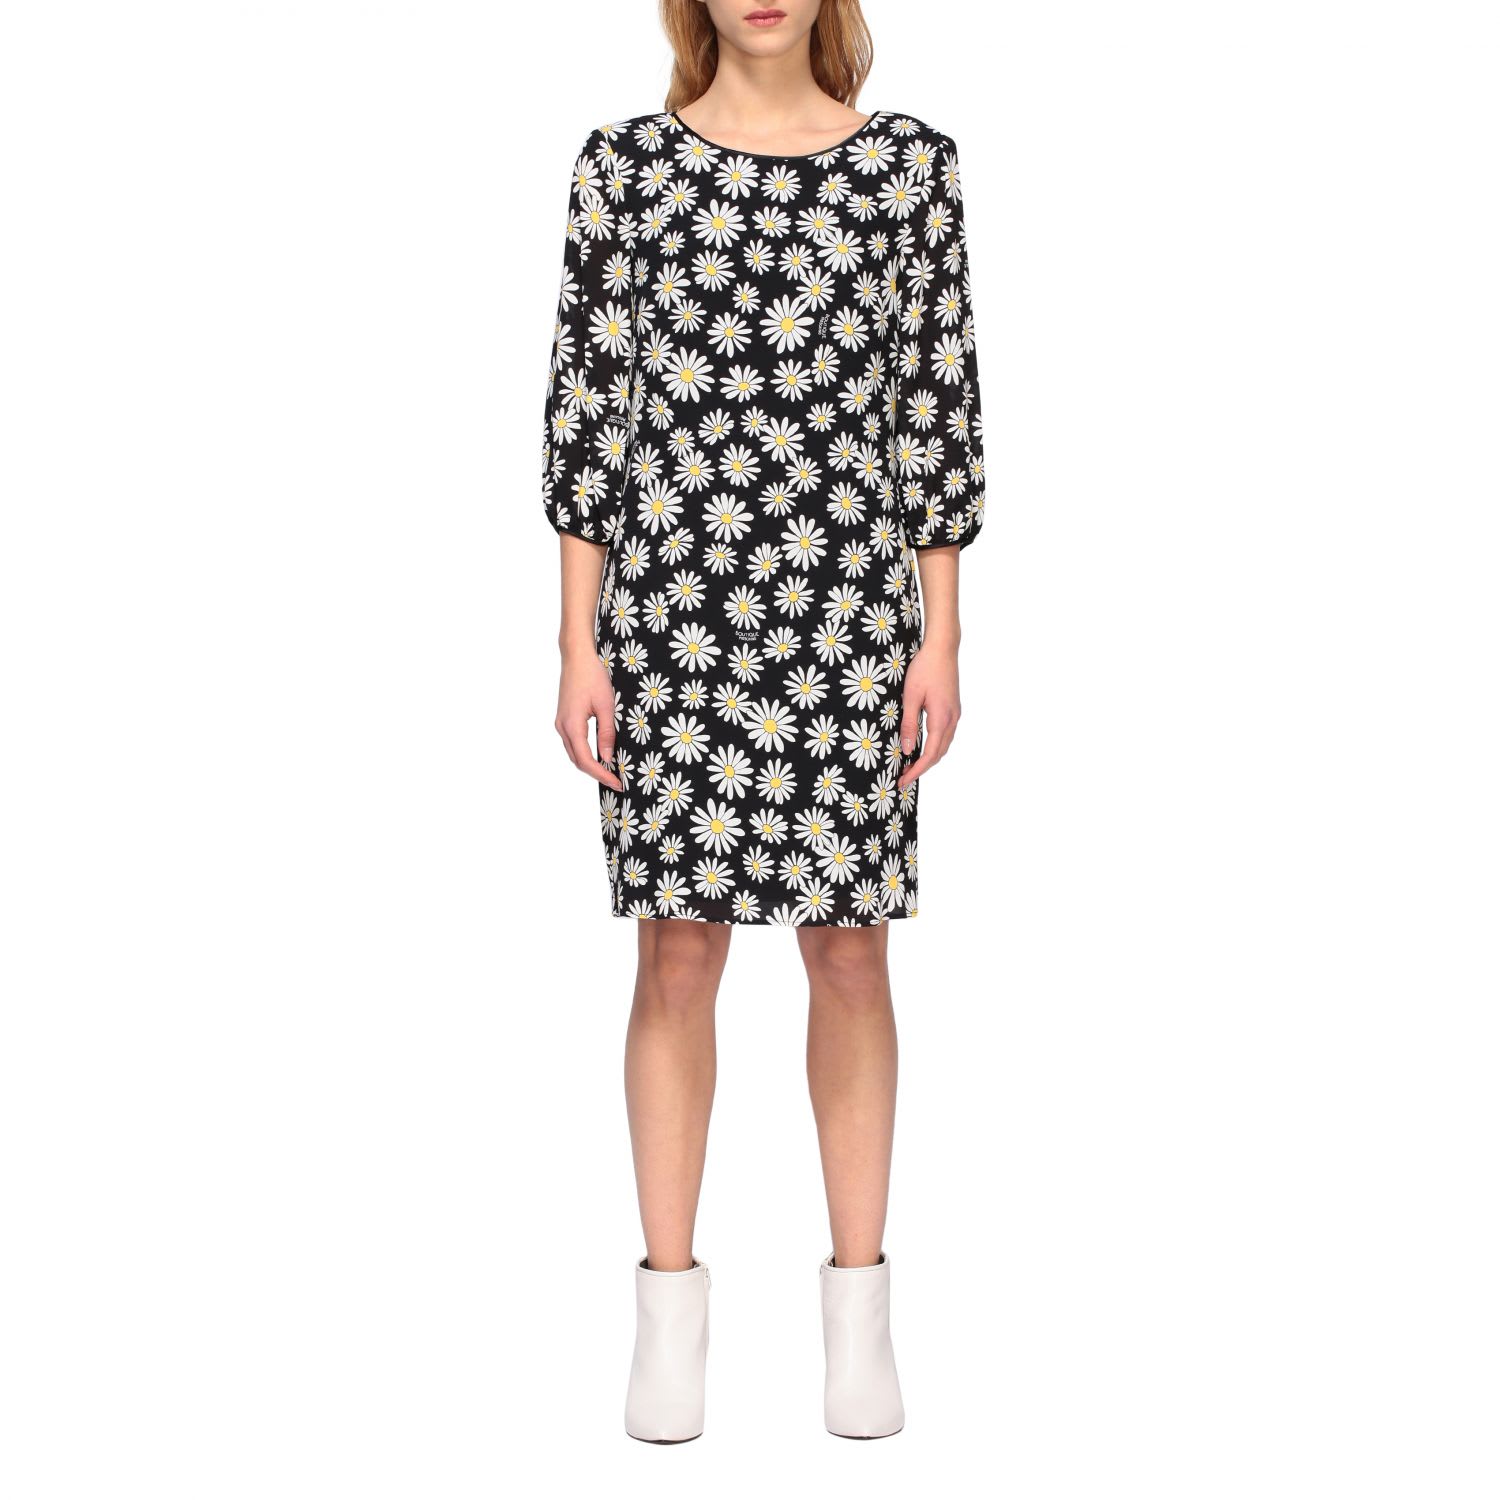 BOUTIQUE MOSCHINO GEORGETTE DRESS WITH DAISY PRINT,11235660